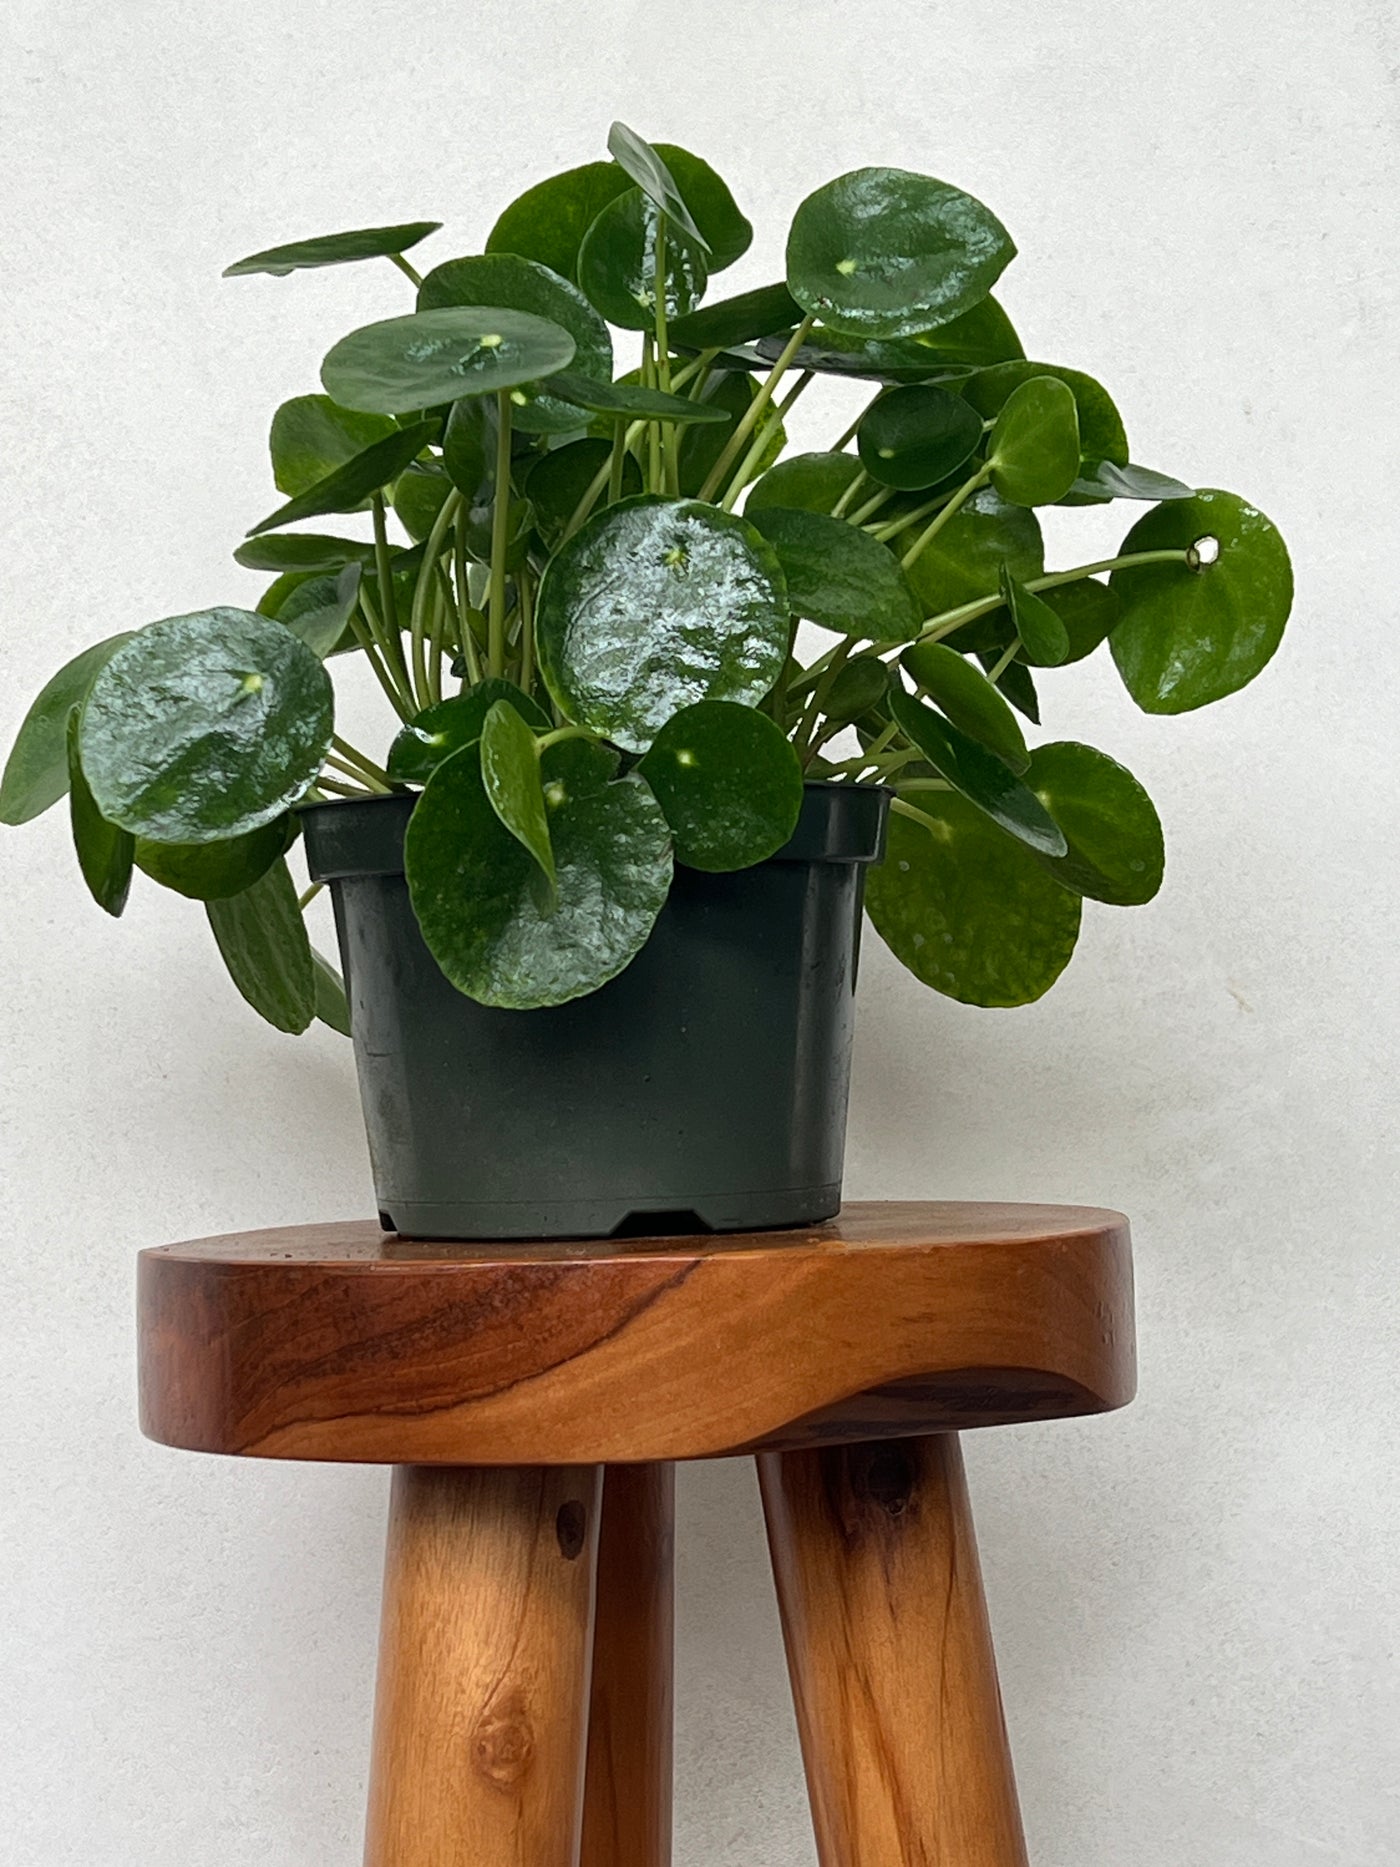 Pilea Peperomiodes (Chinese Money Plant) for sale in Encinitas California at Plant Vault